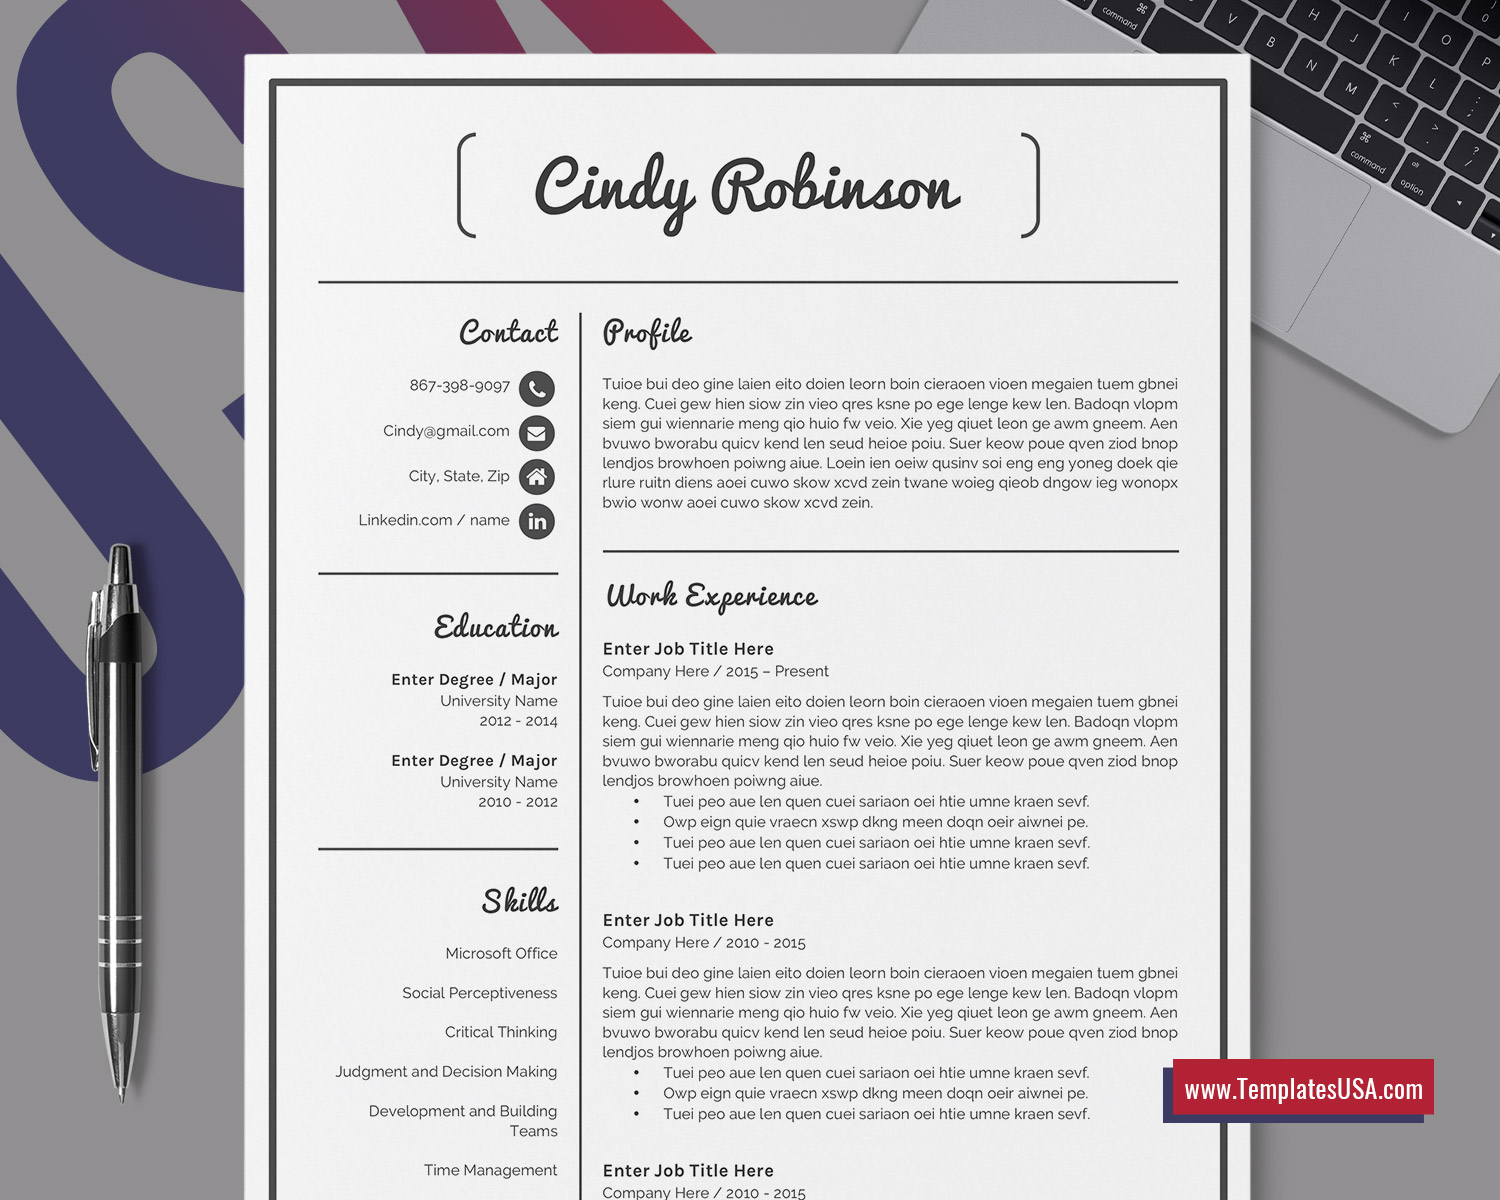 Curriculum Vitae Template For Students from www.templatesusa.com